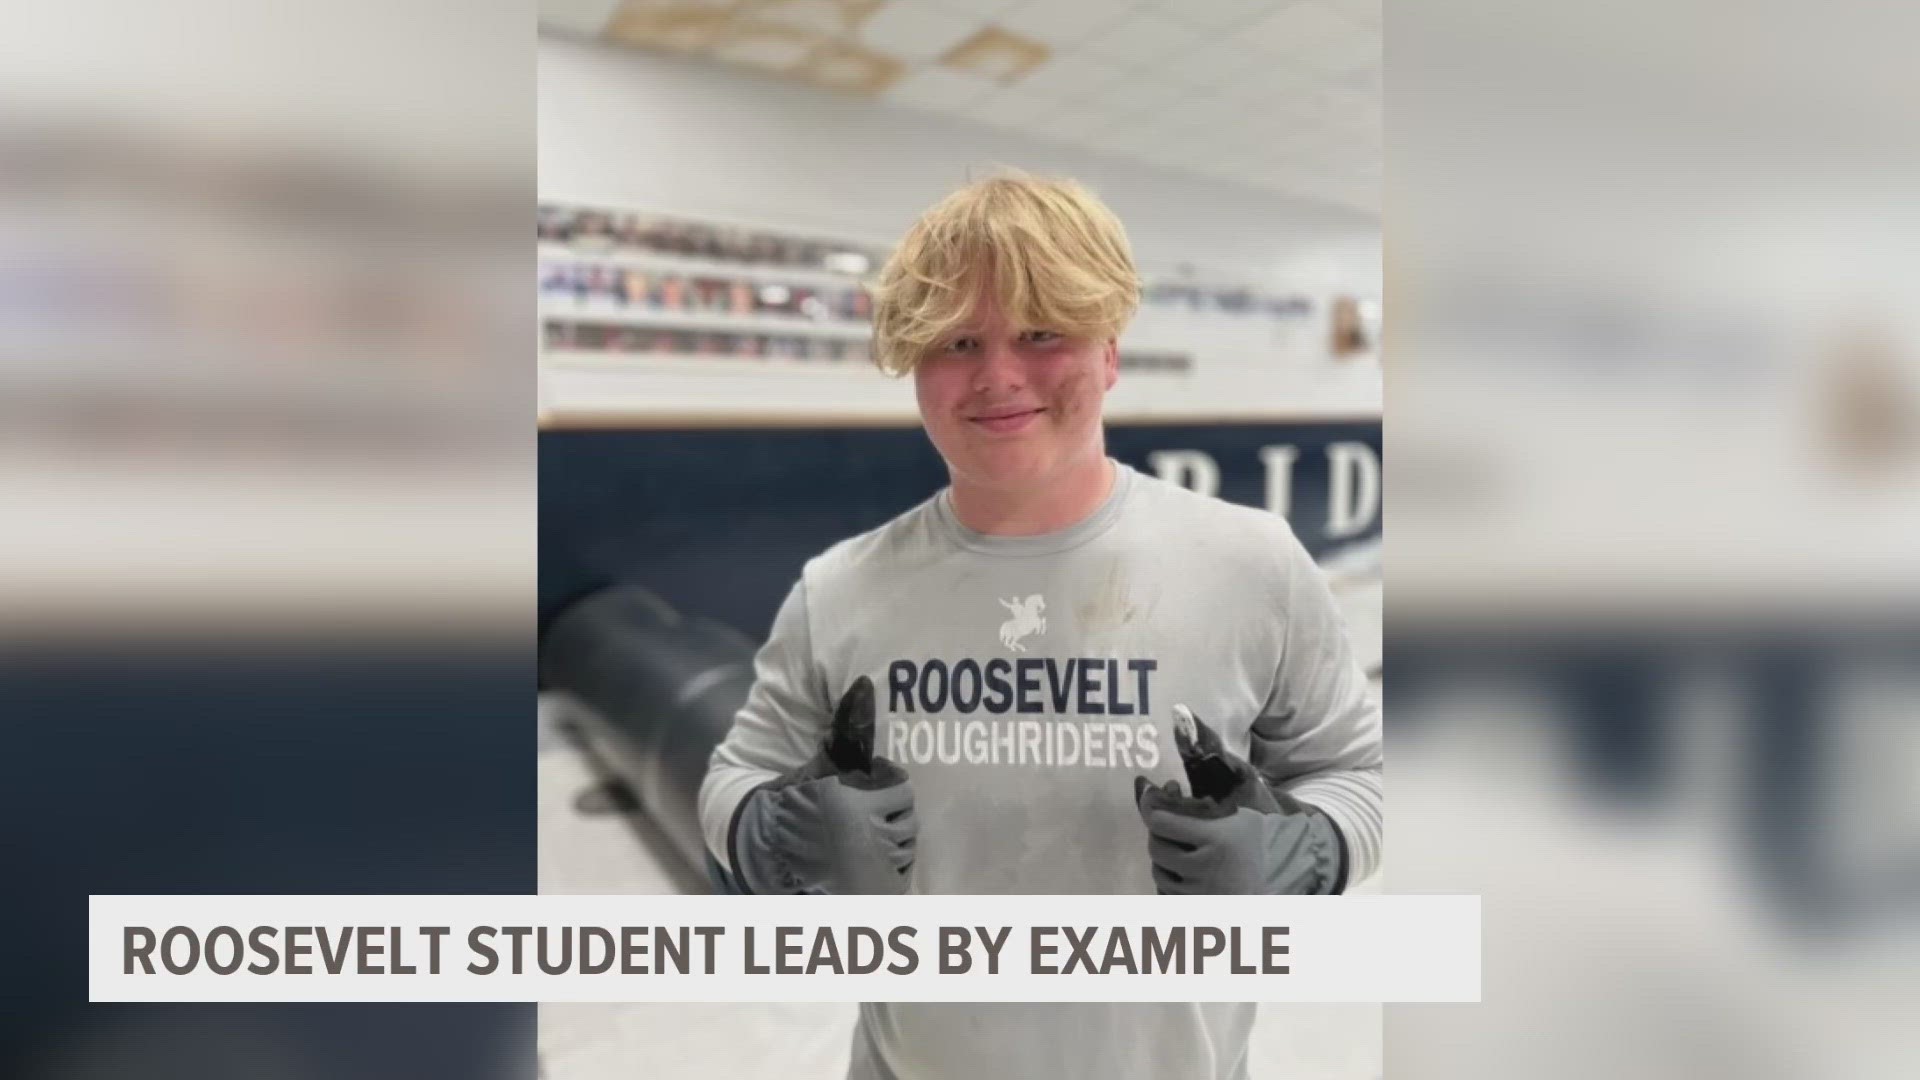 Sam Norris wanted to fix up the school's wrestling room that had been damaged by flooding. Thanks to some help from the community, he was able to achieve his goal.